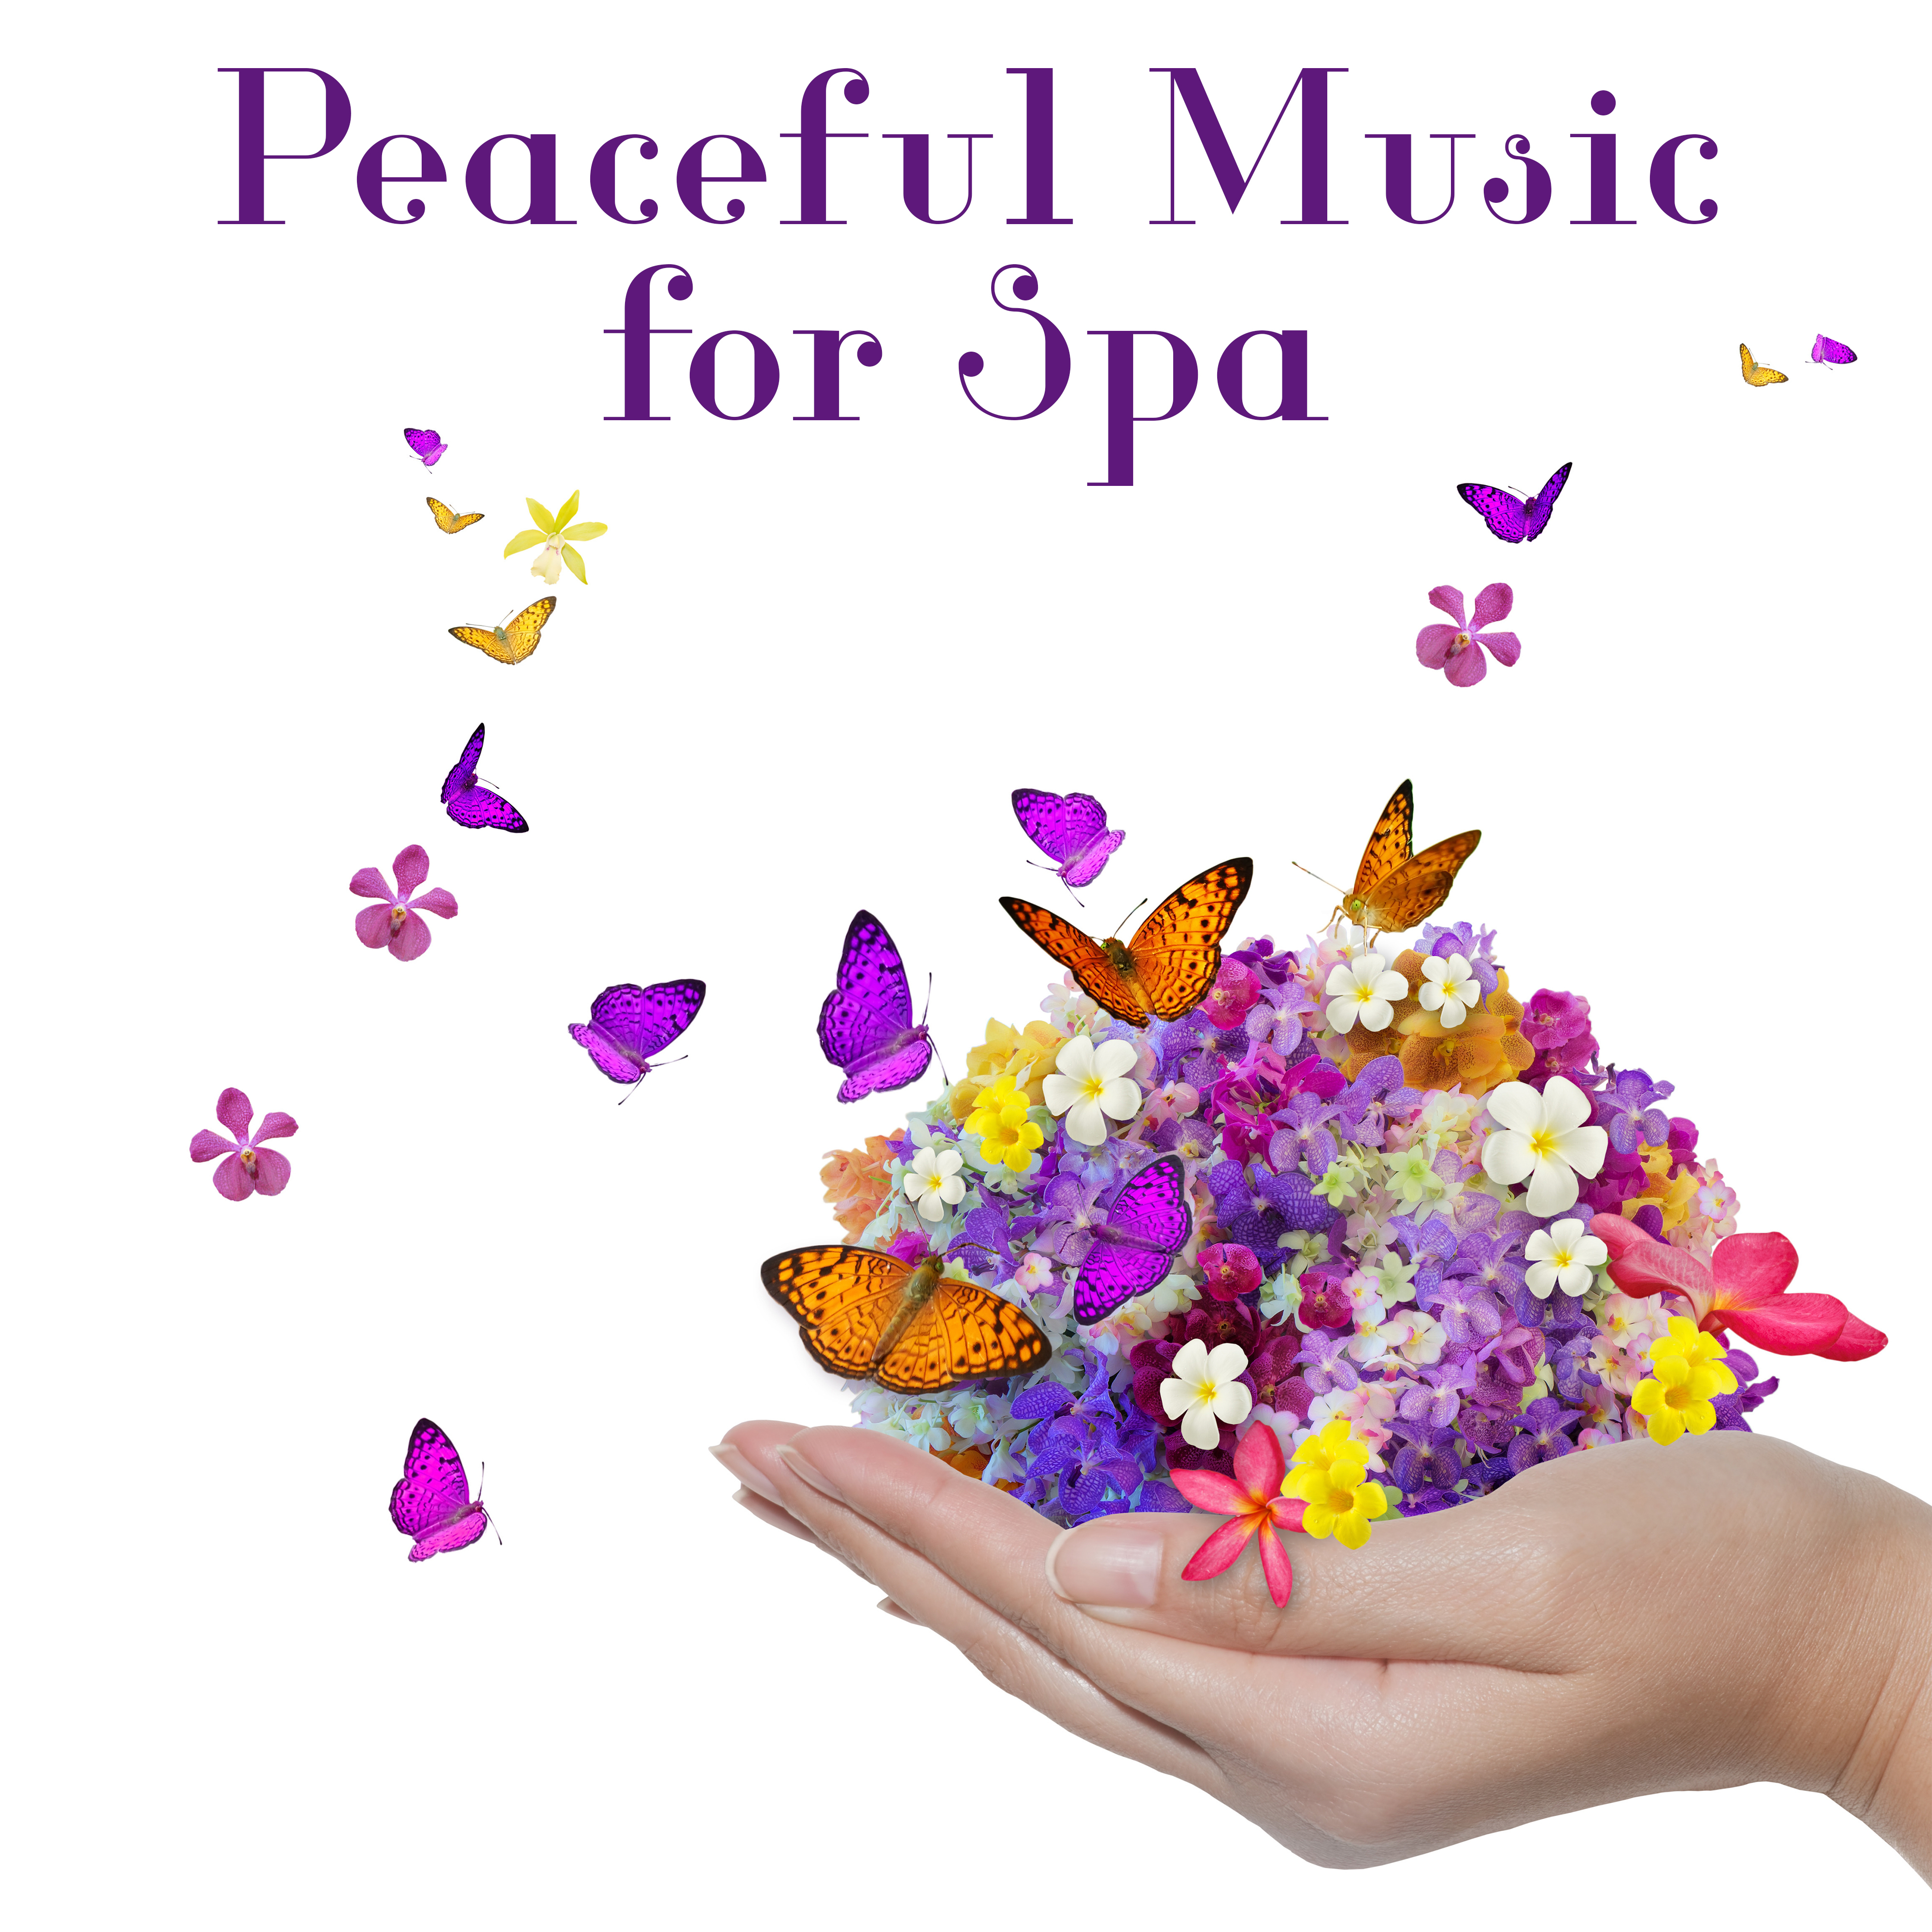 Peaceful Music for Spa – Relaxation Wellness, Pure Massage, Calm Mind, Stress Relief, Spa Music, Zen, Healing Sounds, Massage Therapy